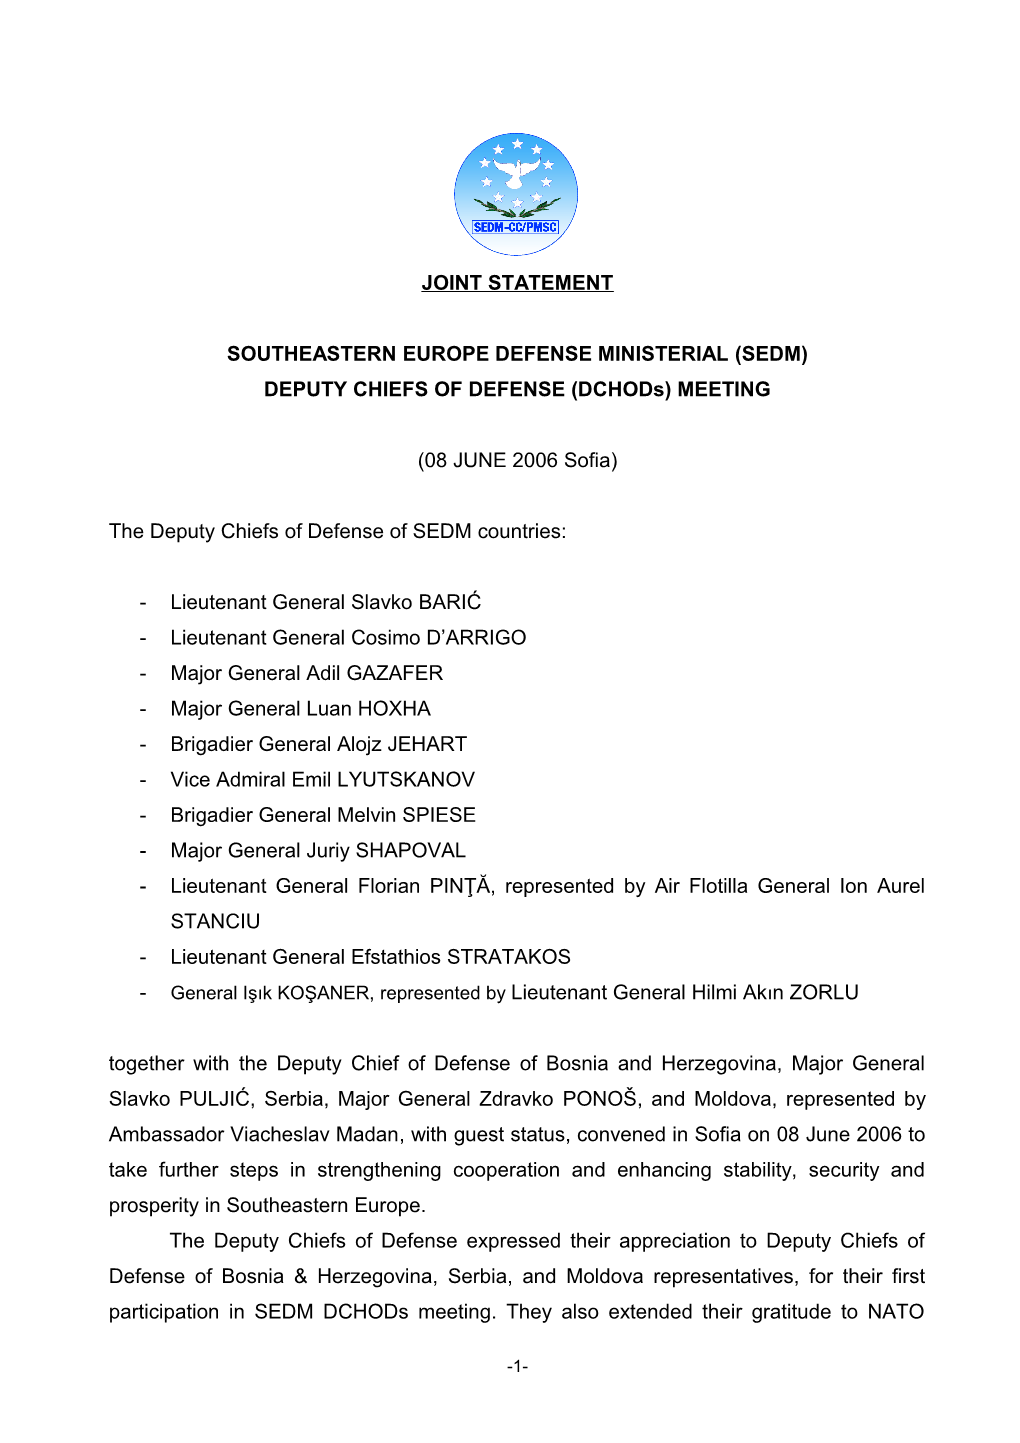 JOINT STATEMENT for DCHOD Sofia